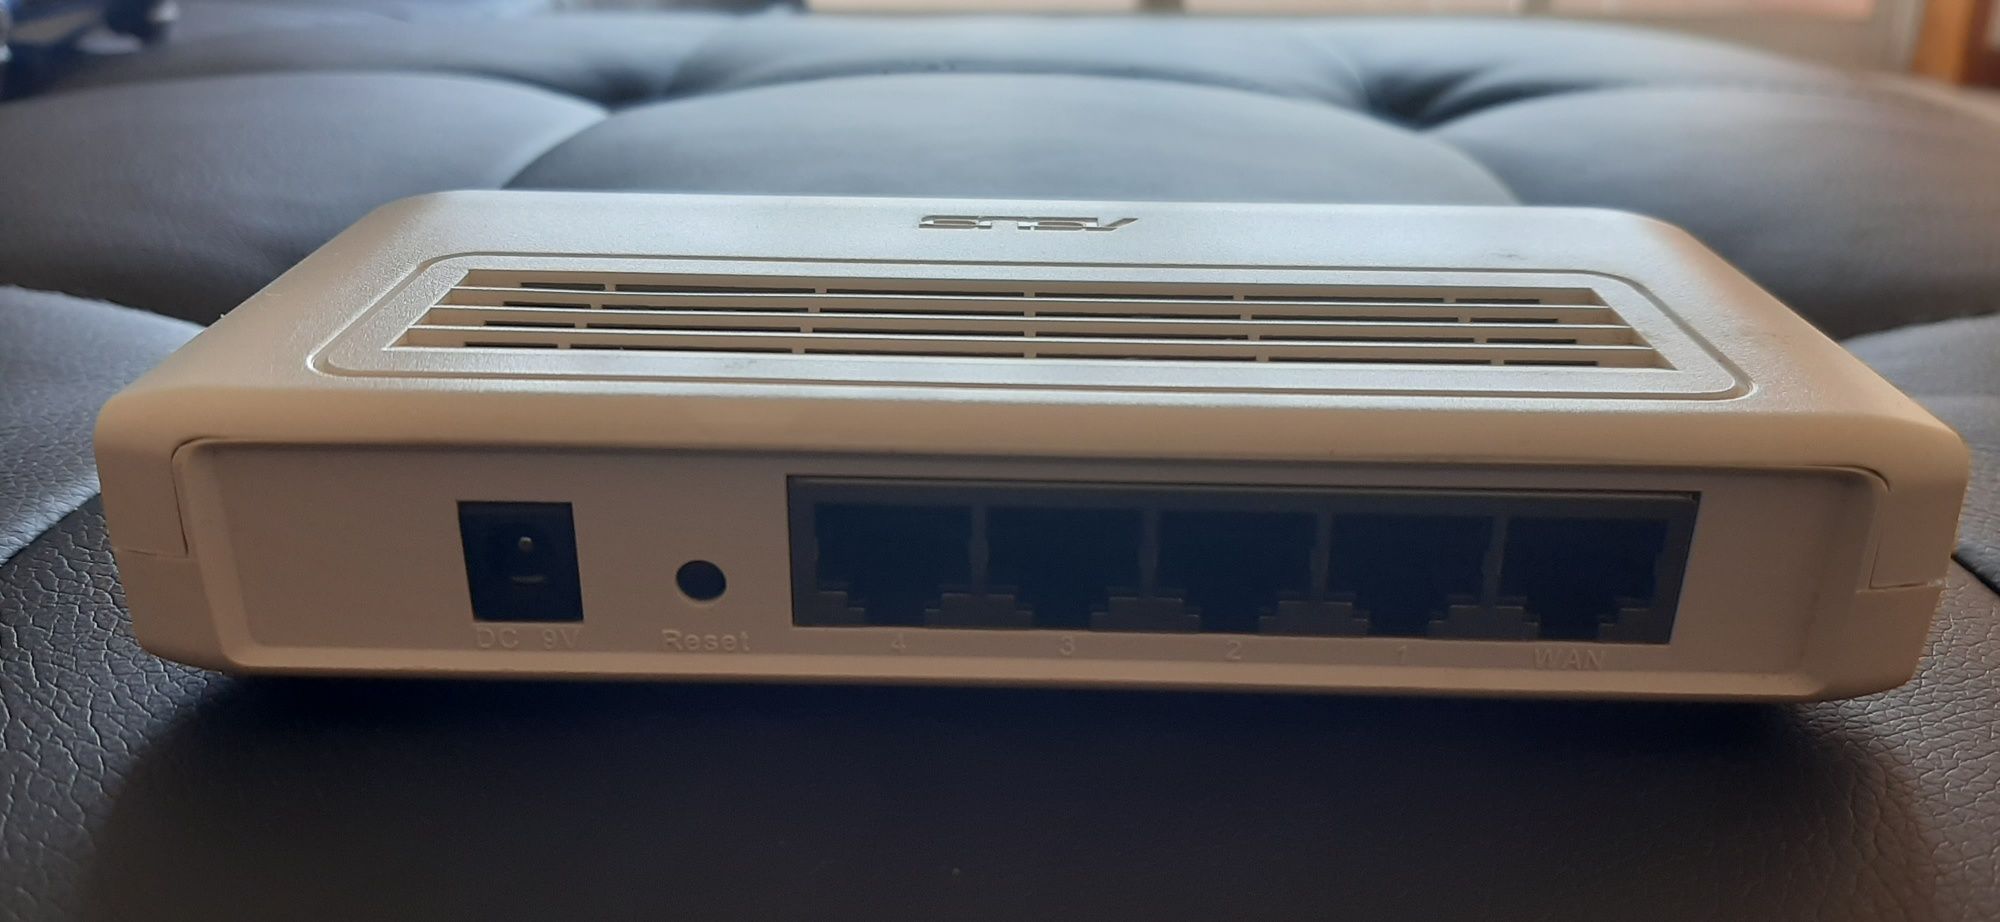 Asus Router RX3041 V2